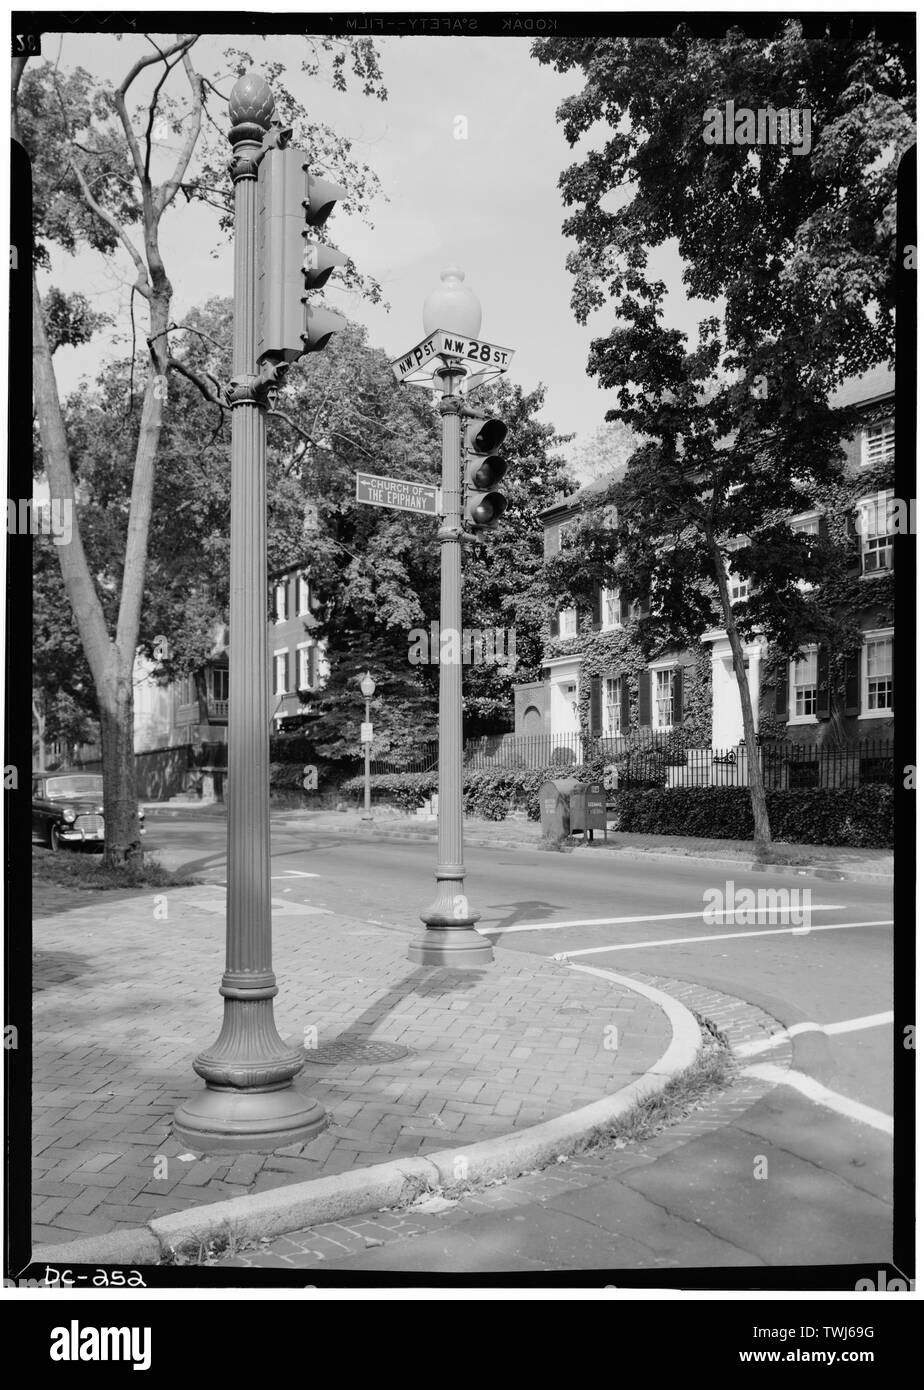 September 1969 TRAFFIC LIGHT, WITH STREET LAMP AND SIGN IN BACKGROUND AT 28th AND P STREETS, N.W. - Georgetown Street Furniture, Georgetown Vicinity, Washington, District of Columbia, DC Stock Photo